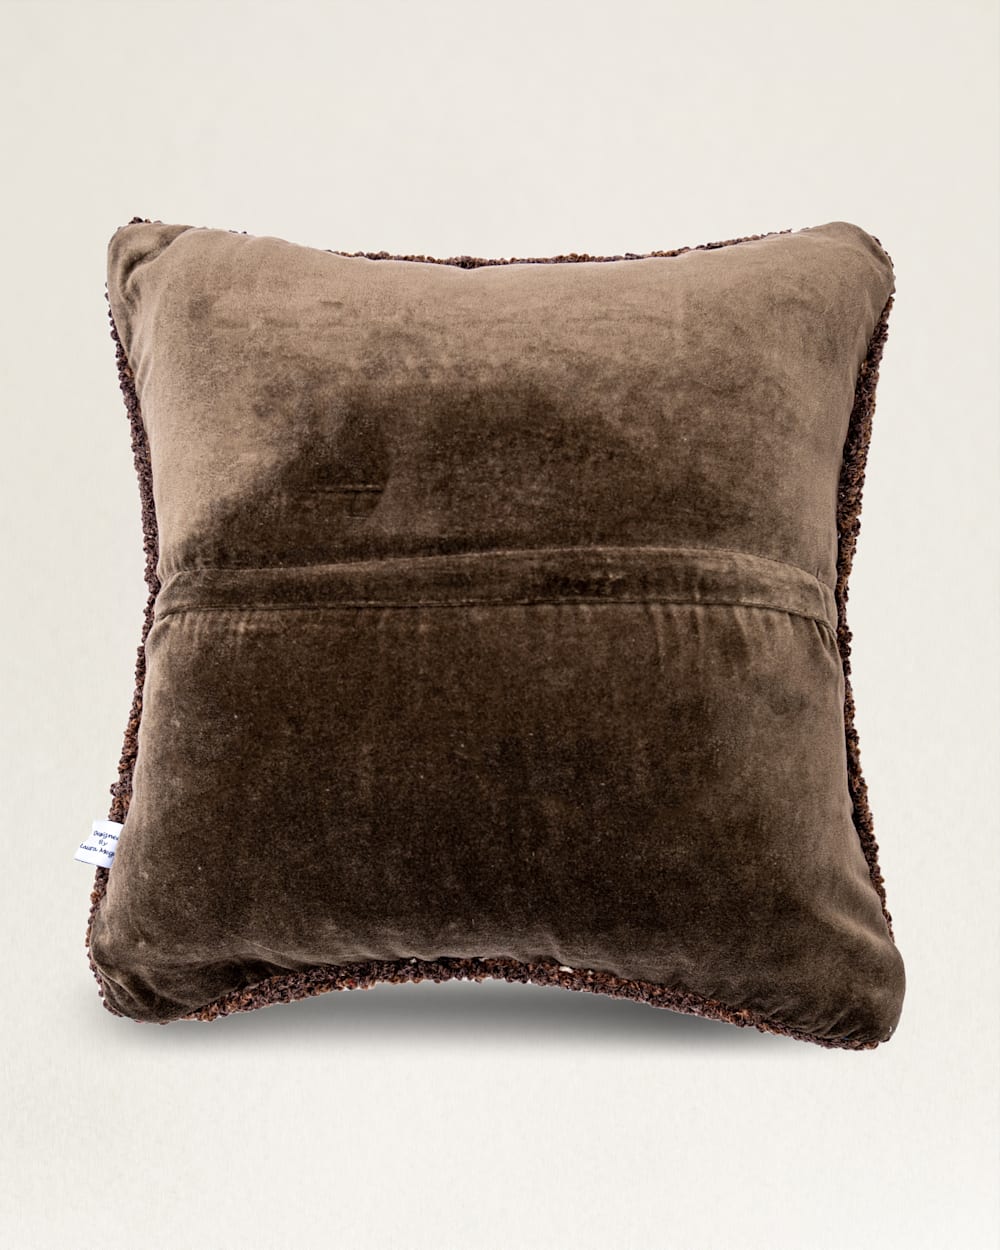 ALTERNATE VIEW OF COWPOKE BOOTS HOOKED SQUARE PILLOW IN BROWN/CREAM image number 2